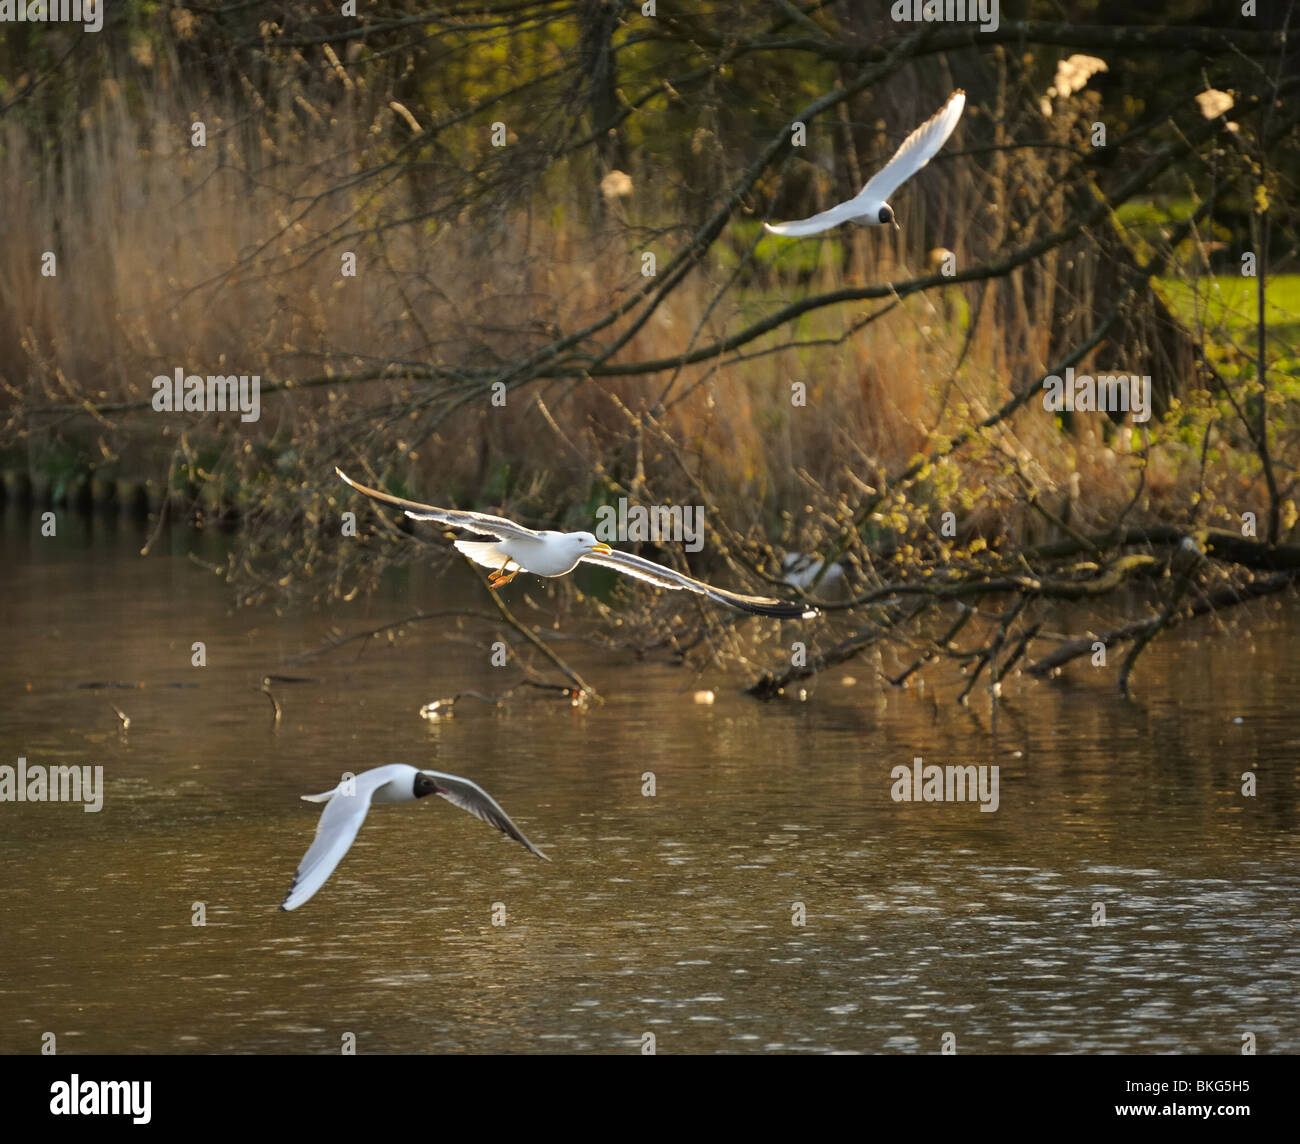 Lesser Black-backed gull soaring on a pretty wavy lake under warm sunset beam, accompanied by two black-headed gulls Stock Photo